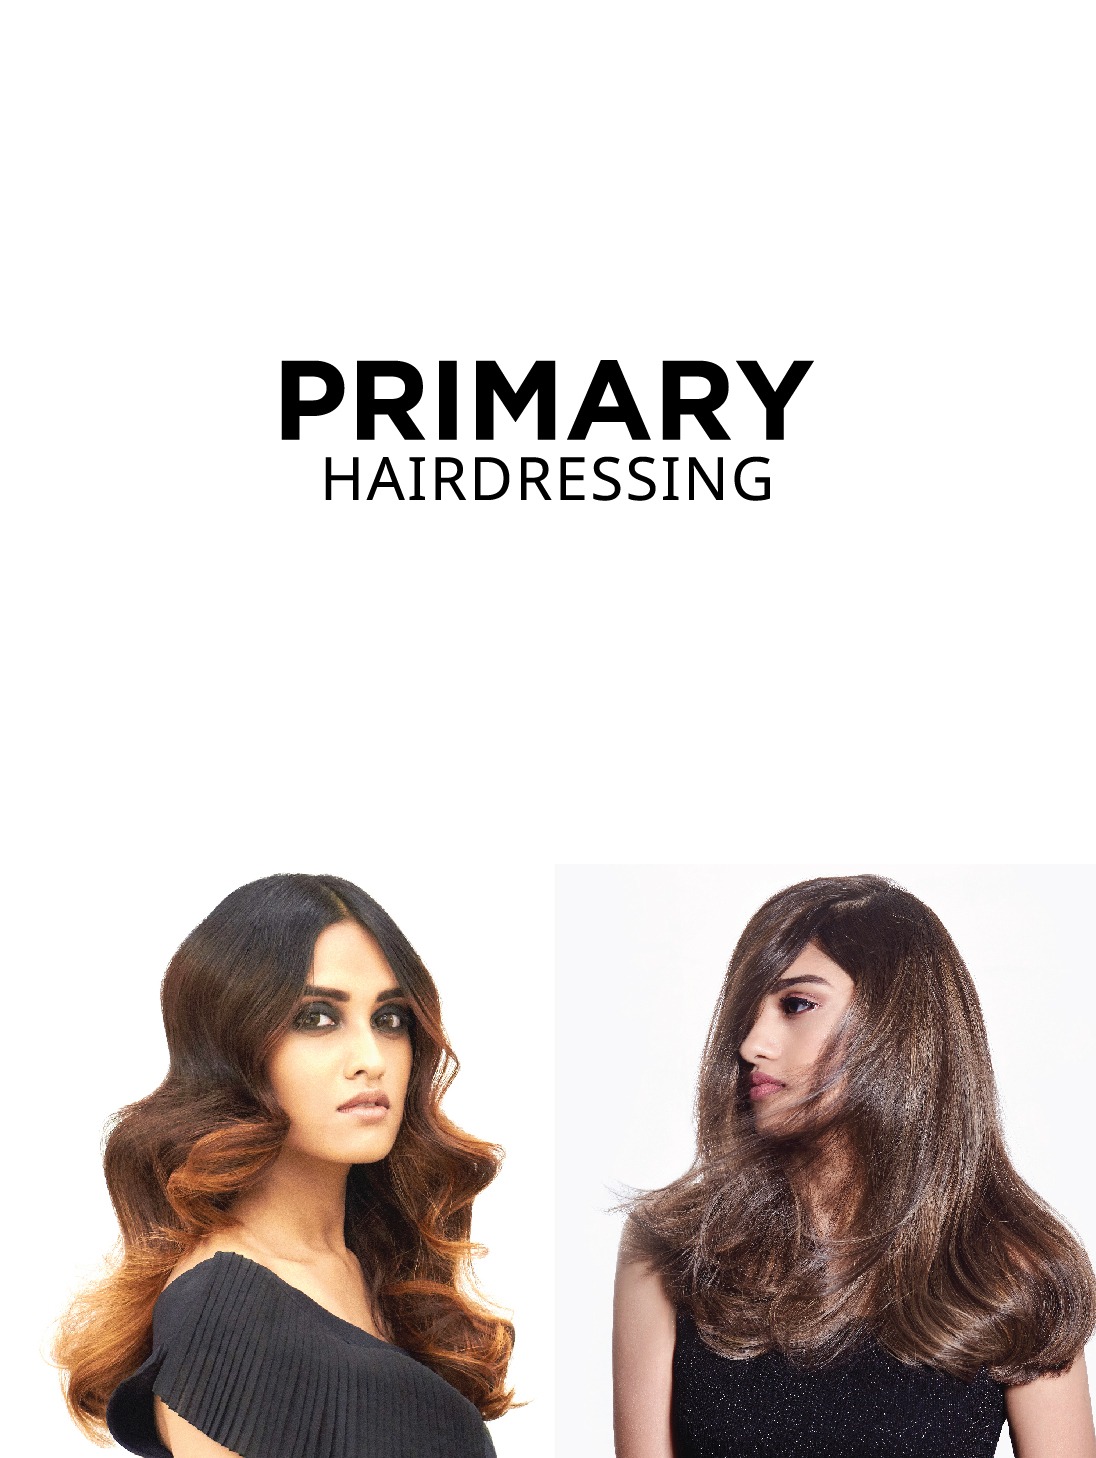 Primary Hairdressing